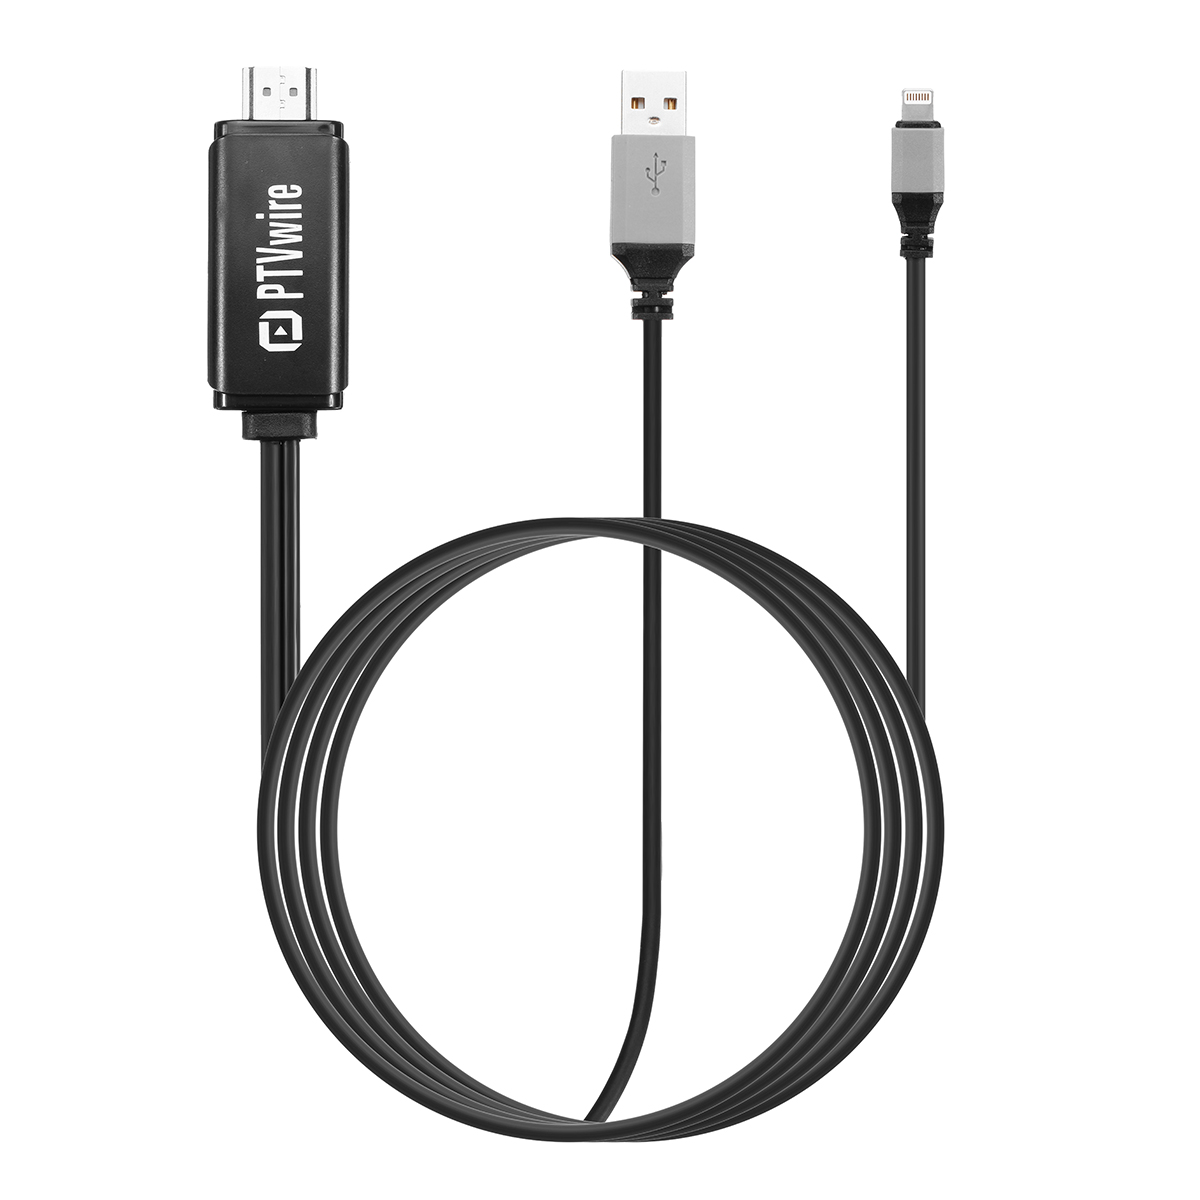 Bakeey-USB-to-HDMI-Adapter-Cable-Support-8-Channels-Digital-Audio-Support-AirplayMirroring-2M-Long-1940268-10